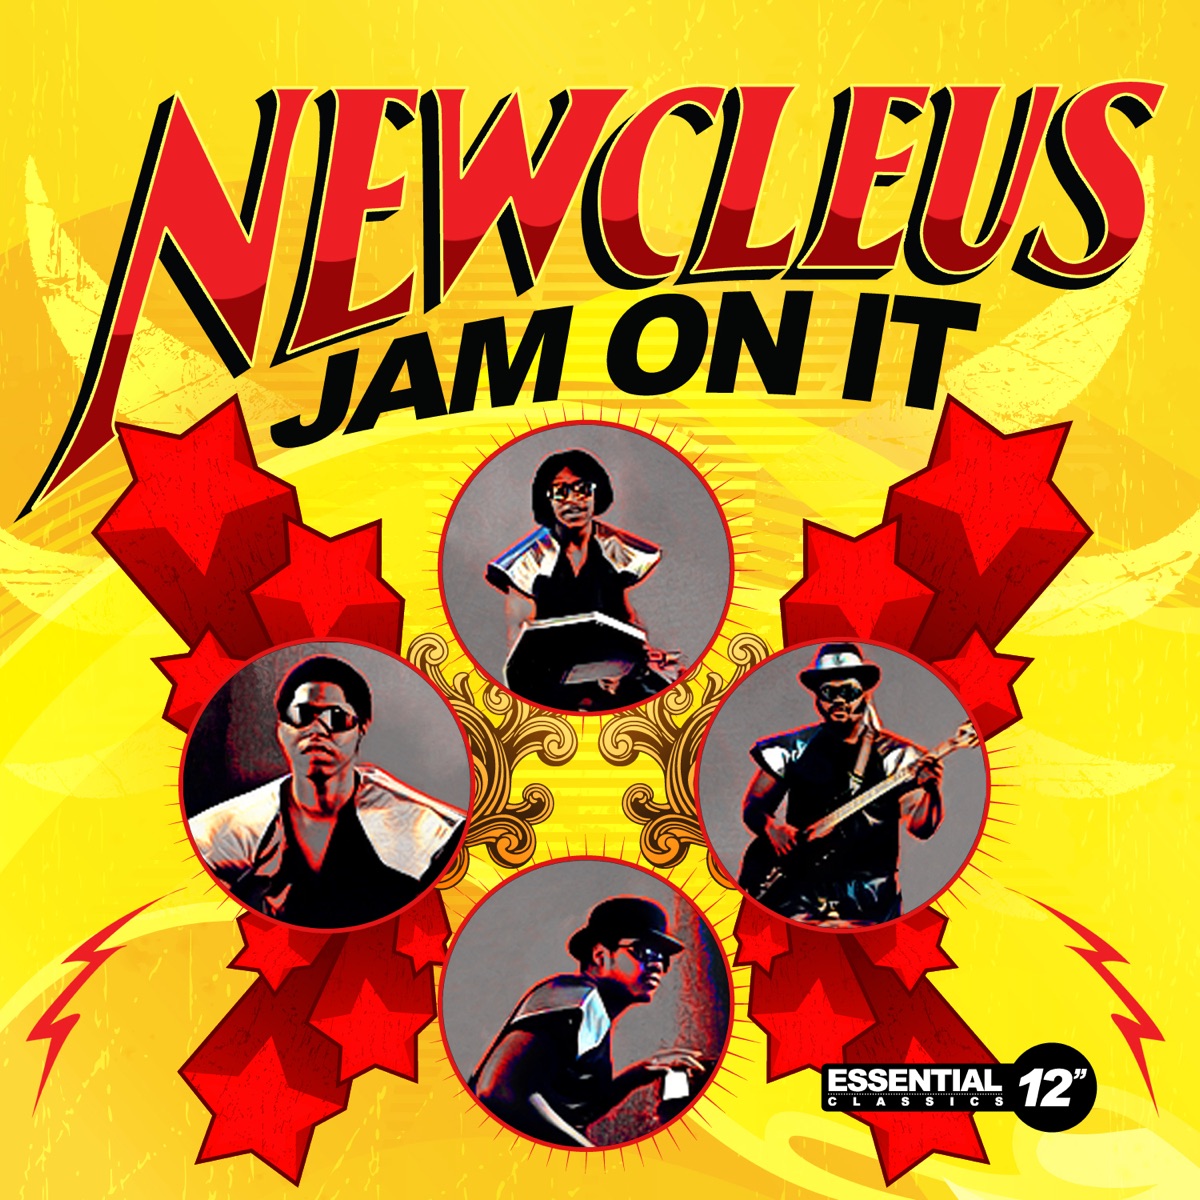 Jam On It - EP by Newcleus on Apple Music